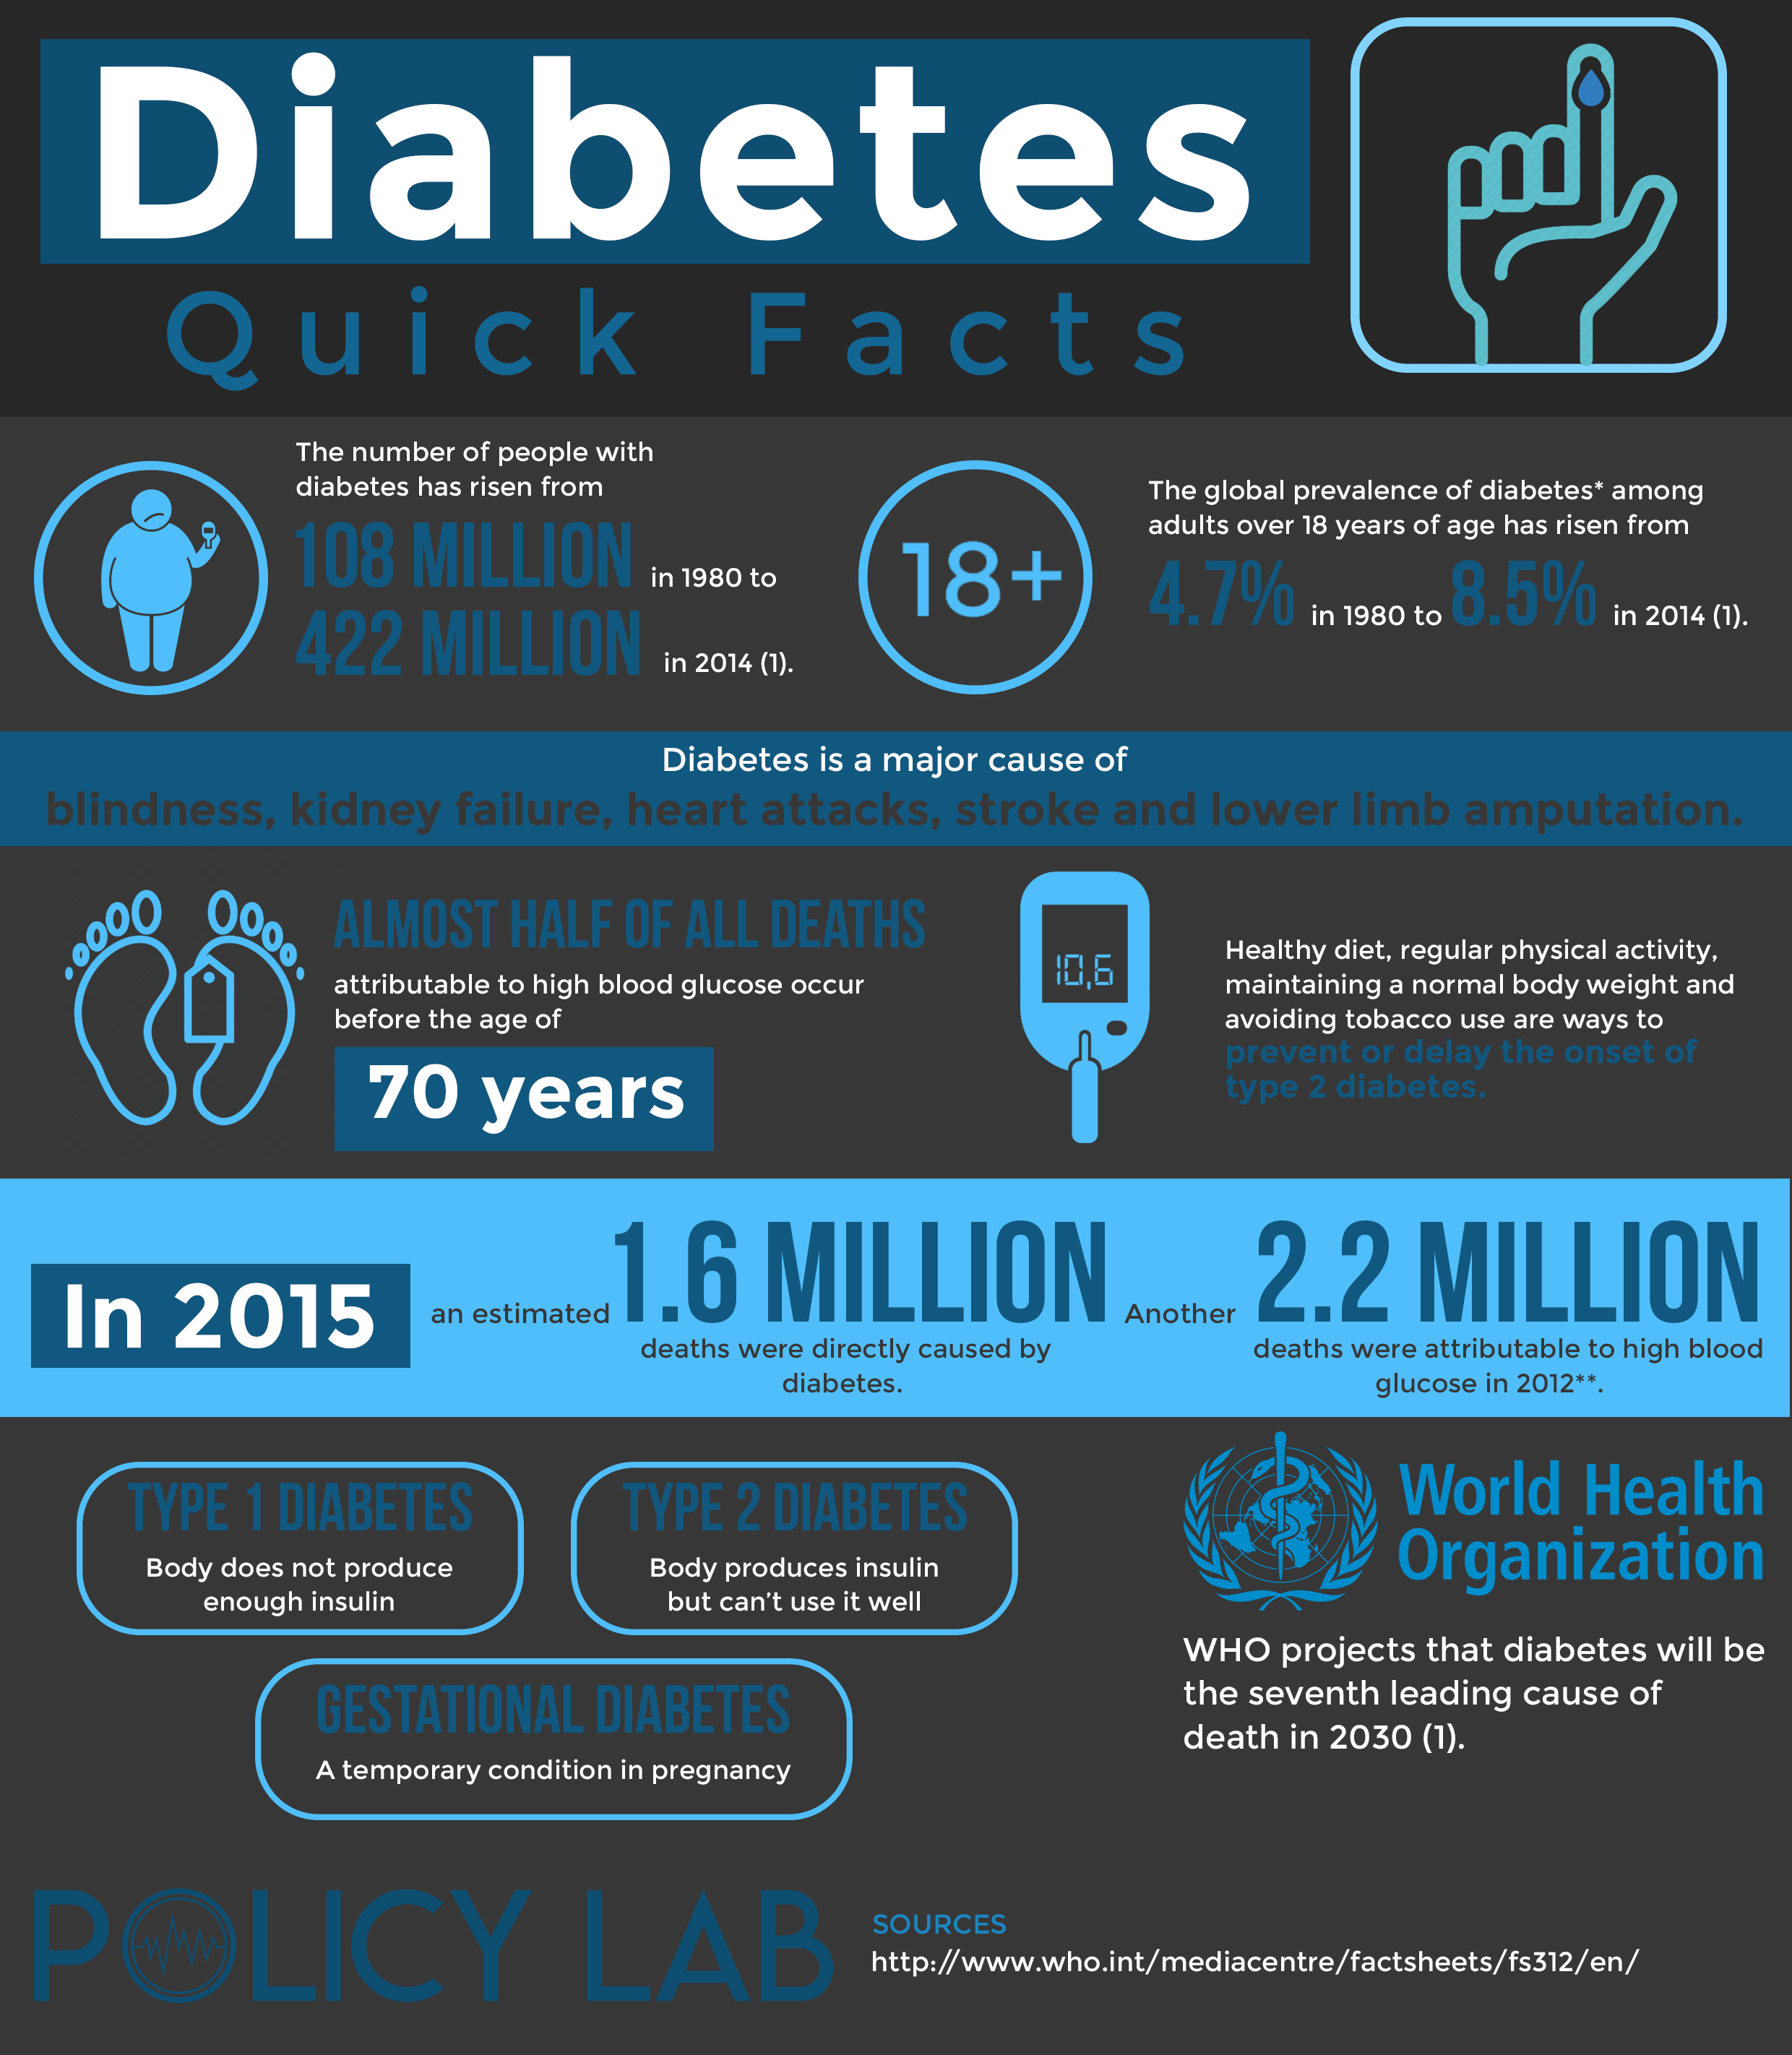 Diabetes Infographic Image and Quick Facts